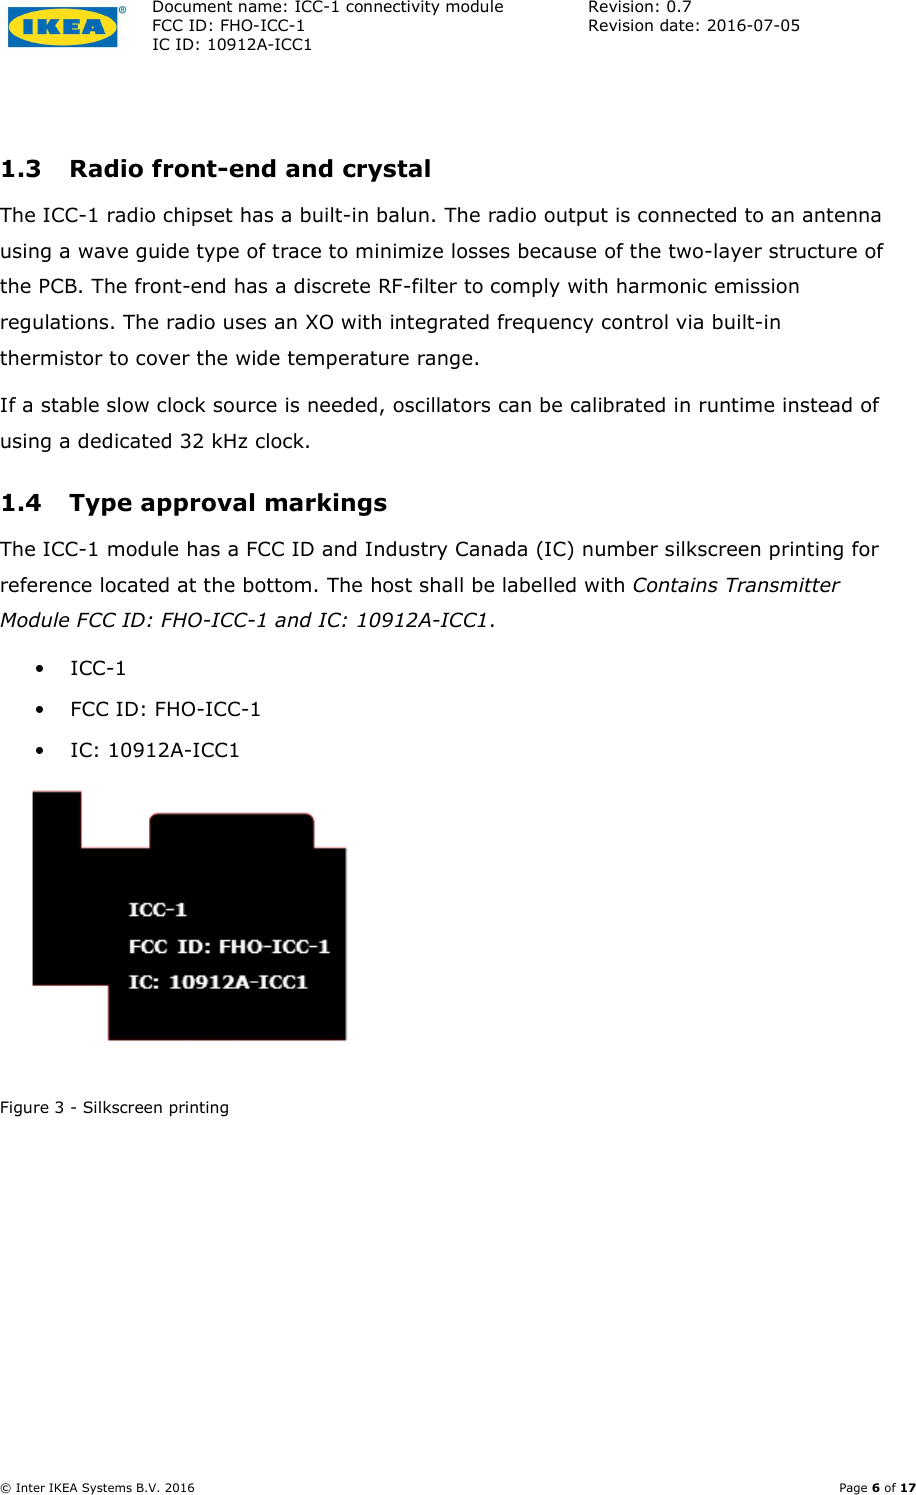 Document name: ICC-1 connectivity module  Revision: 0.7 FCC ID: FHO-ICC-1  Revision date: 2016-07-05  IC ID: 10912A-ICC1     © Inter IKEA Systems B.V. 2016    Page 6 of 17  1.3 Radio front-end and crystal The ICC-1 radio chipset has a built-in balun. The radio output is connected to an antenna using a wave guide type of trace to minimize losses because of the two-layer structure of the PCB. The front-end has a discrete RF-filter to comply with harmonic emission regulations. The radio uses an XO with integrated frequency control via built-in thermistor to cover the wide temperature range. If a stable slow clock source is needed, oscillators can be calibrated in runtime instead of using a dedicated 32 kHz clock.  1.4 Type approval markings The ICC-1 module has a FCC ID and Industry Canada (IC) number silkscreen printing for reference located at the bottom. The host shall be labelled with Contains Transmitter Module FCC ID: FHO-ICC-1 and IC: 10912A-ICC1. • ICC-1 • FCC ID: FHO-ICC-1 • IC: 10912A-ICC1  Figure 3 - Silkscreen printing 